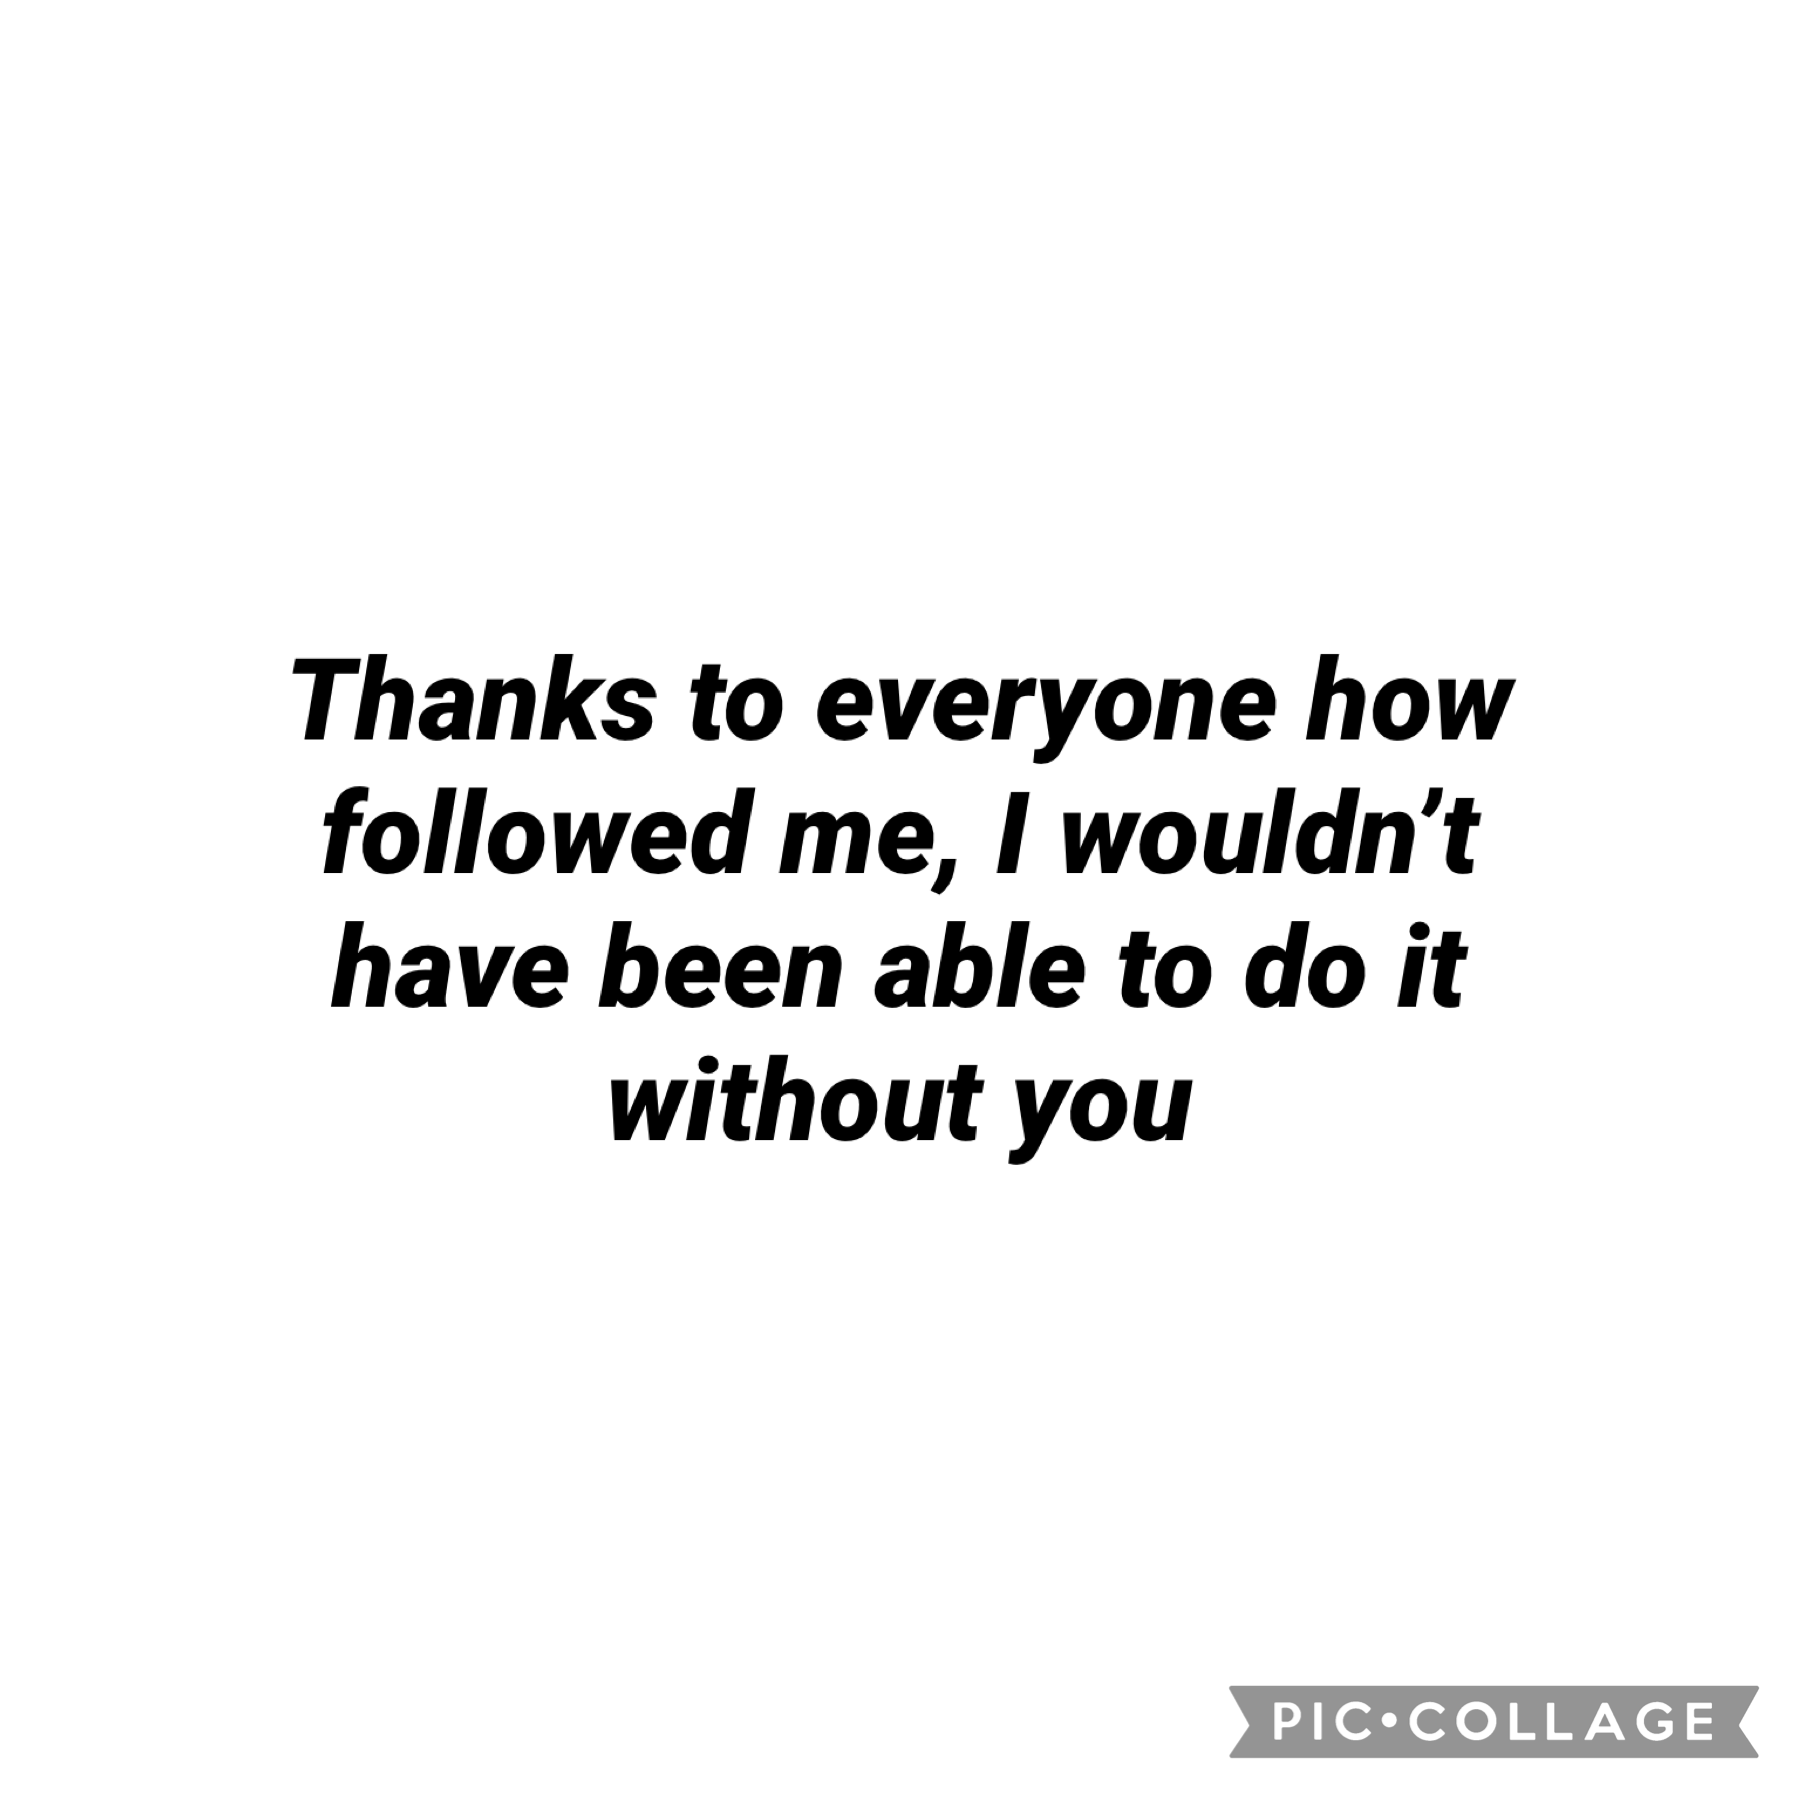 Thanks followers if you have not yet followed me please follow me thx